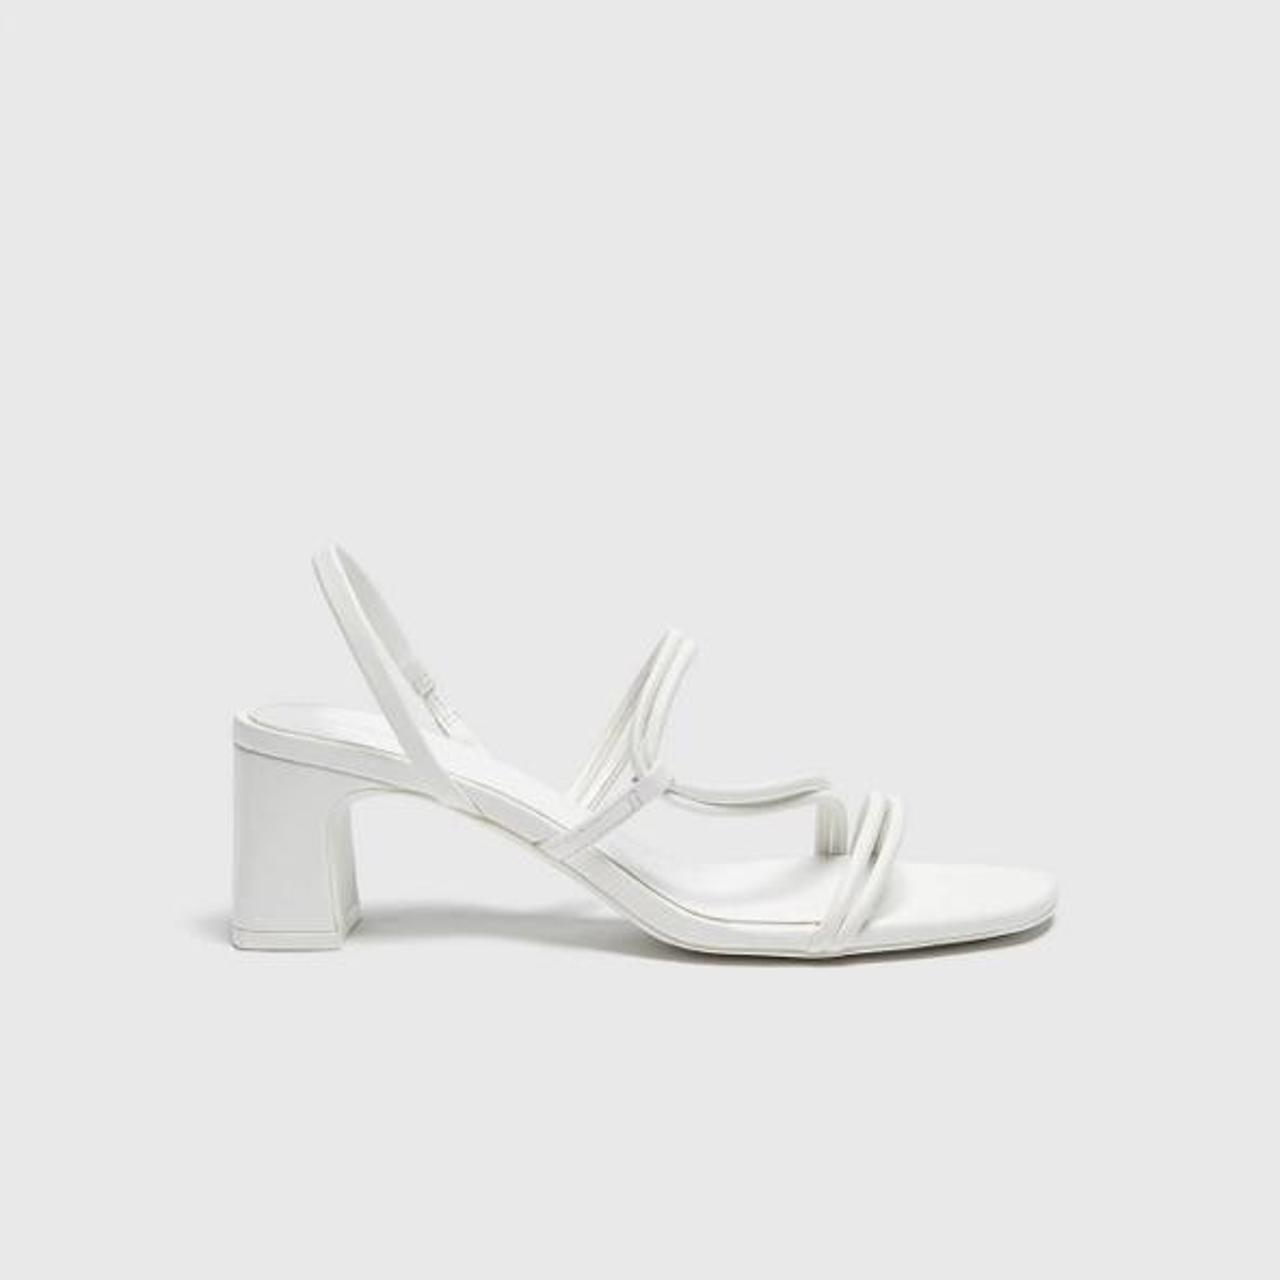 Pull and bear strappy high heel sandals in white... - Depop